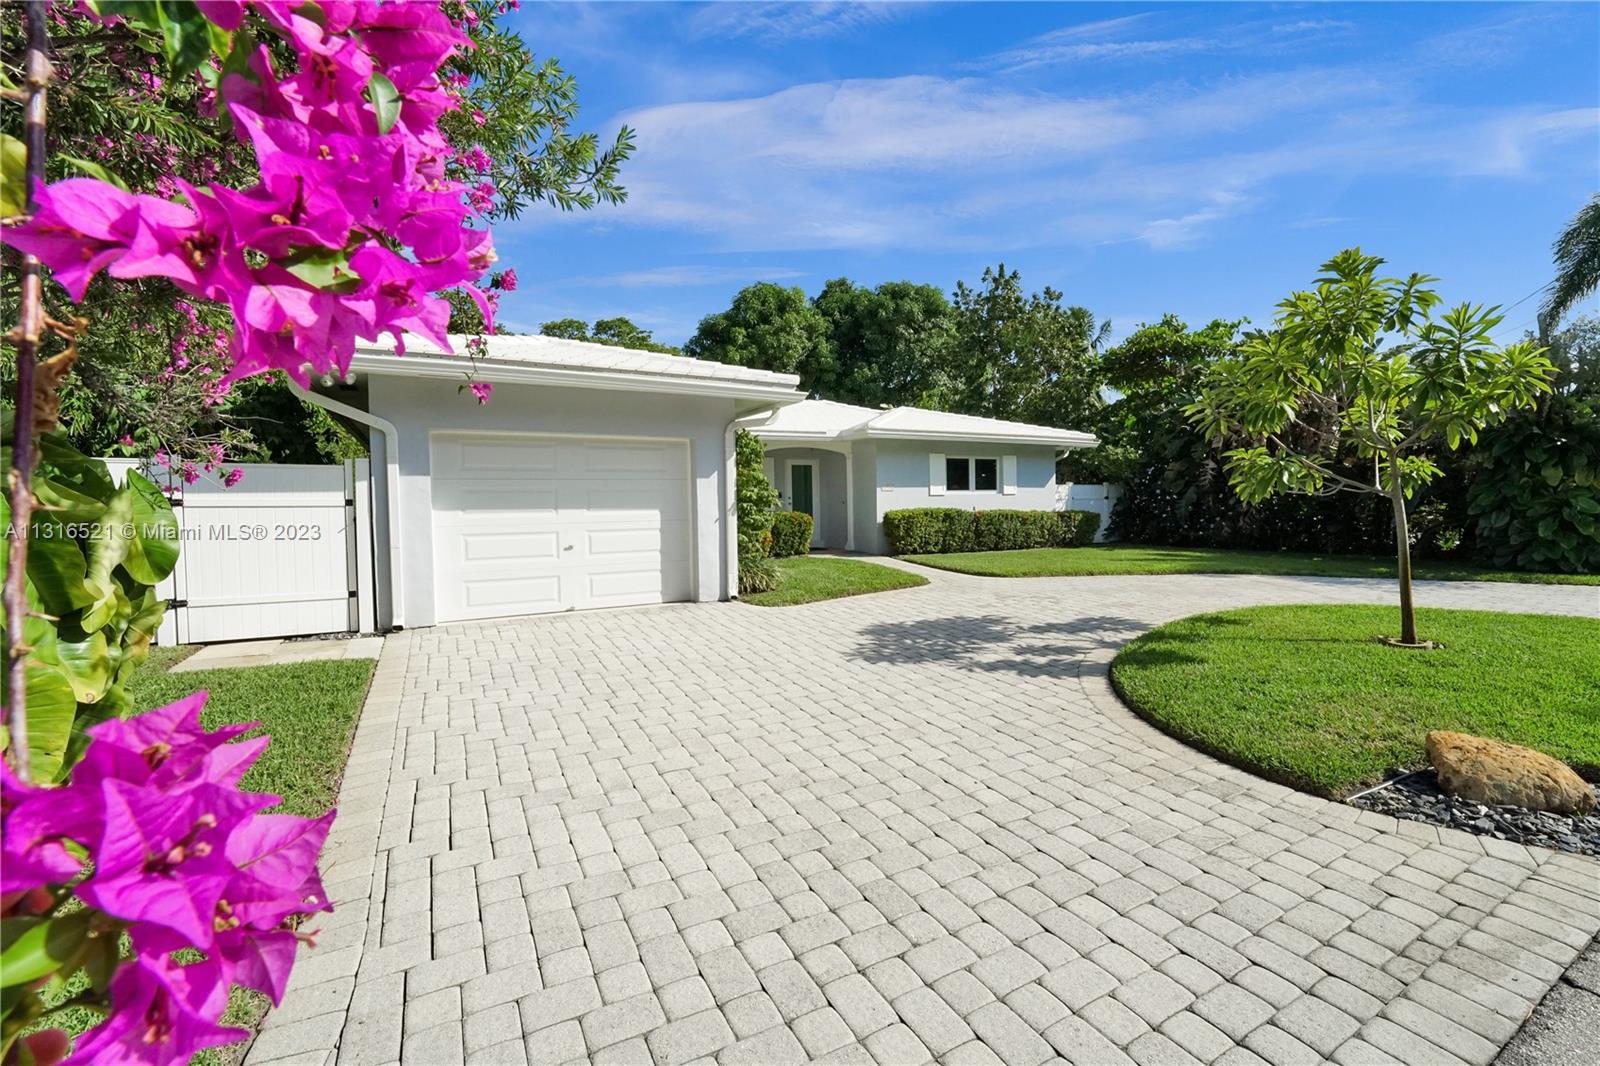 Just 5 blocks to Wilton Drive & TOTAL privacy with mangrove preserve directly across the gentle wate